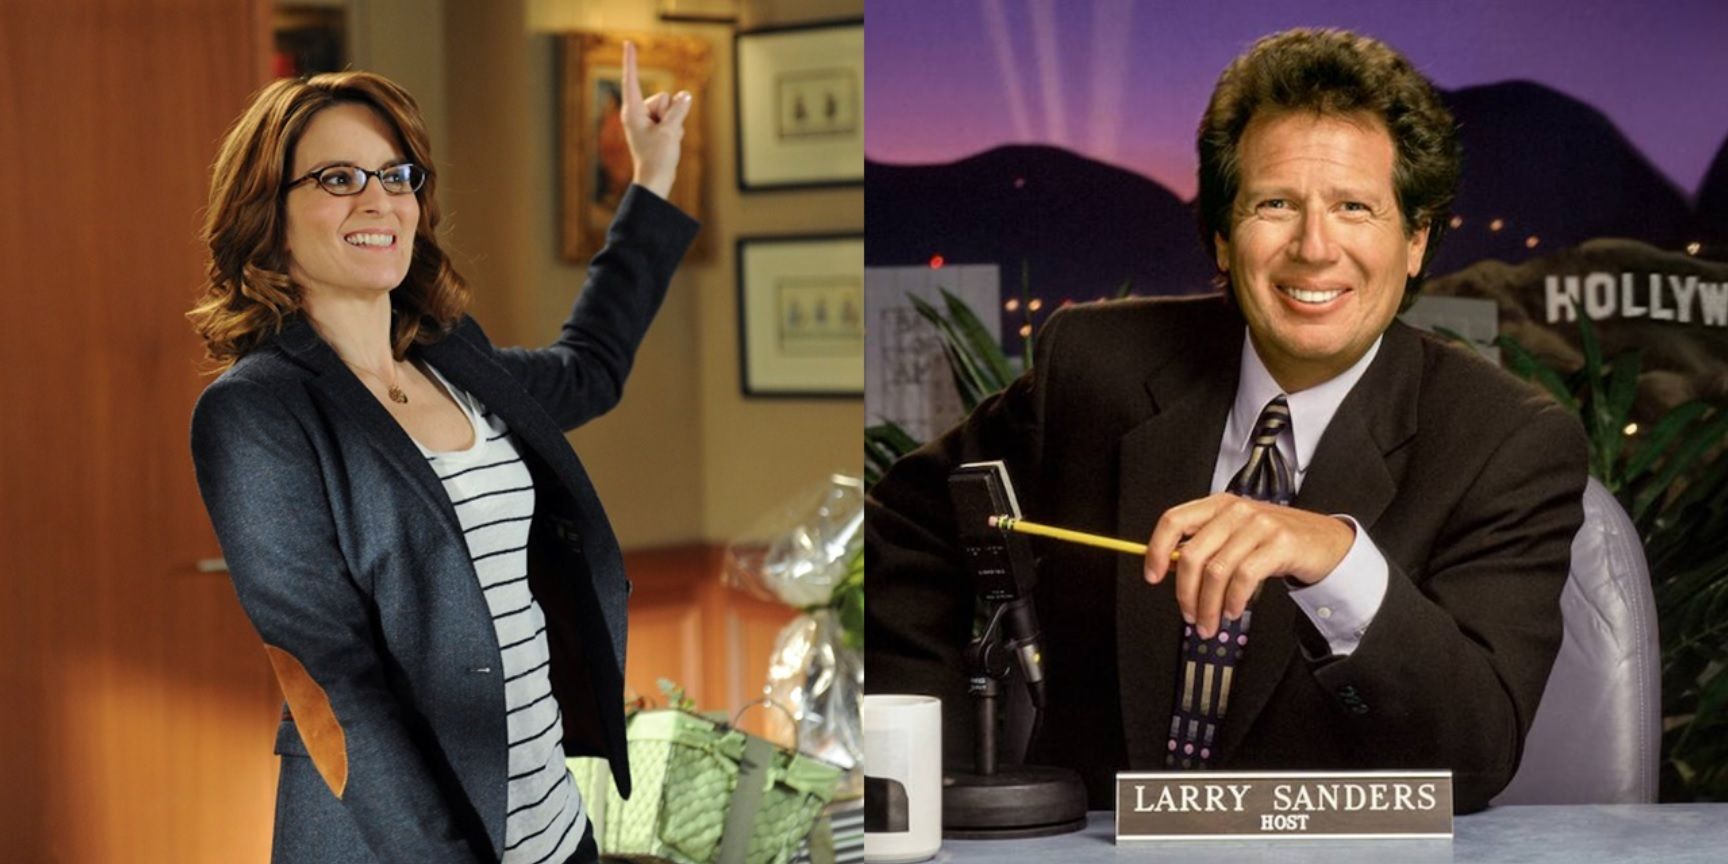 Split image of Tina Fey in 30 Rock and Garry Shandling in The Larry Sanders Show